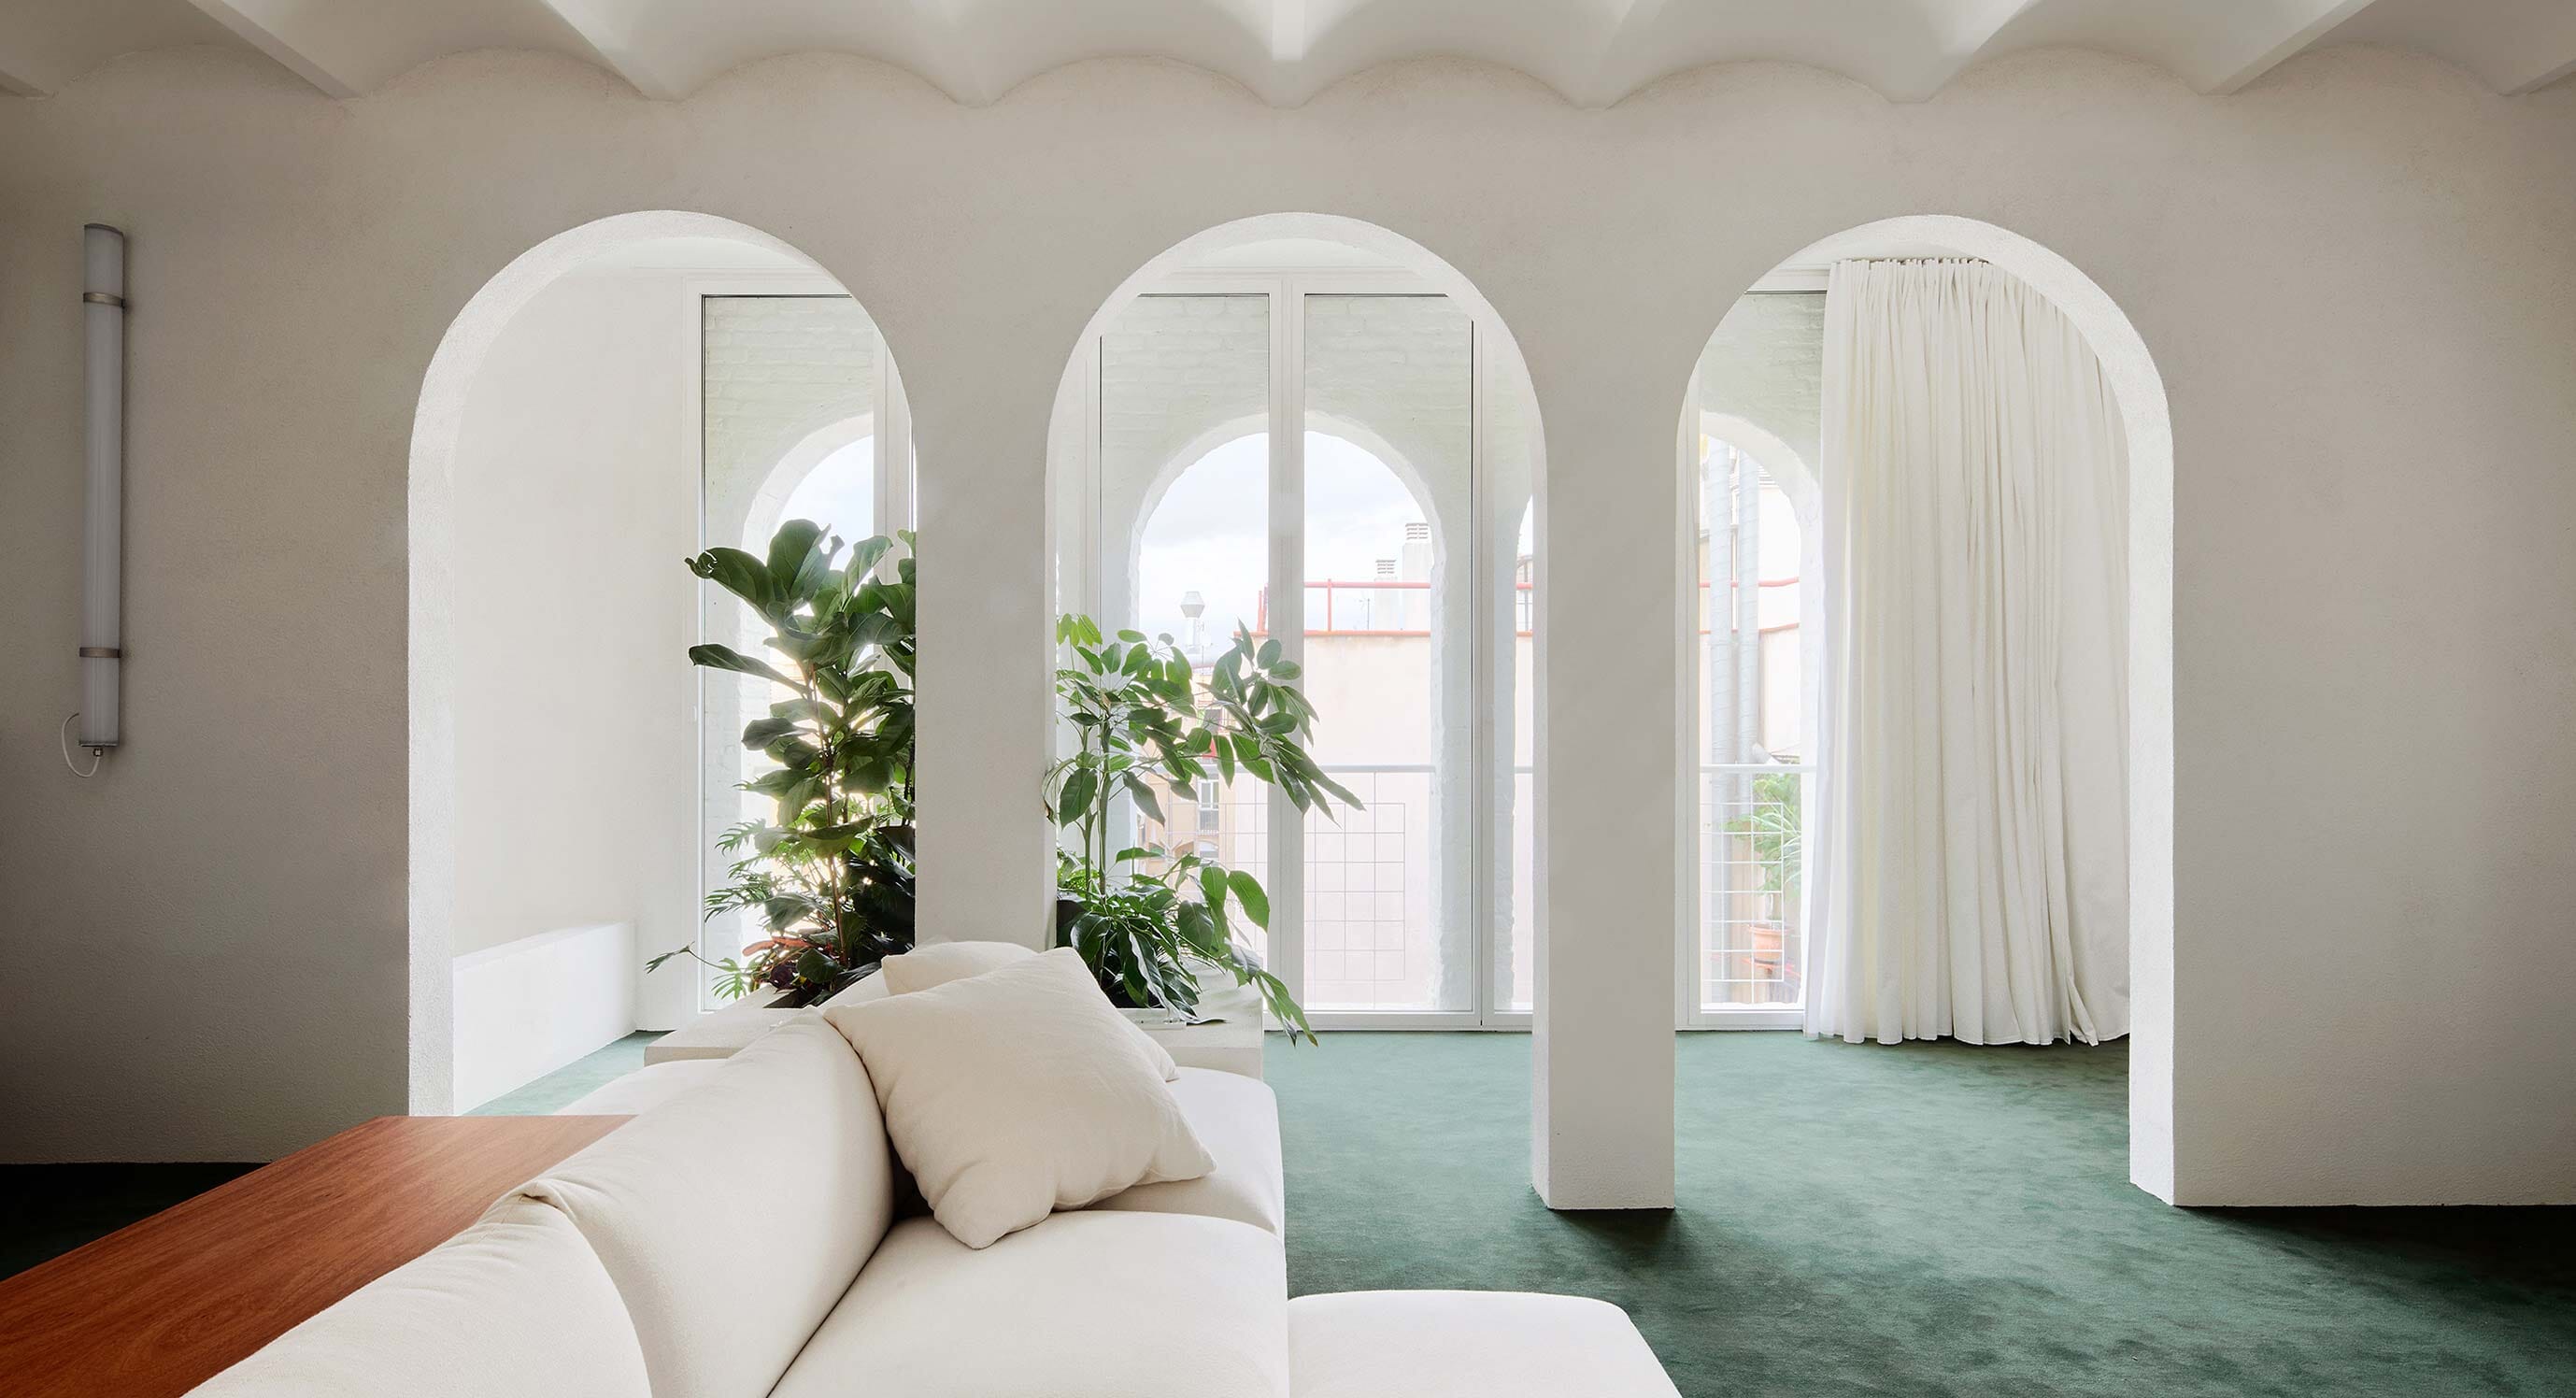 P-M-A-A’s Penthouse Is A Surreal Escape From Barcelona